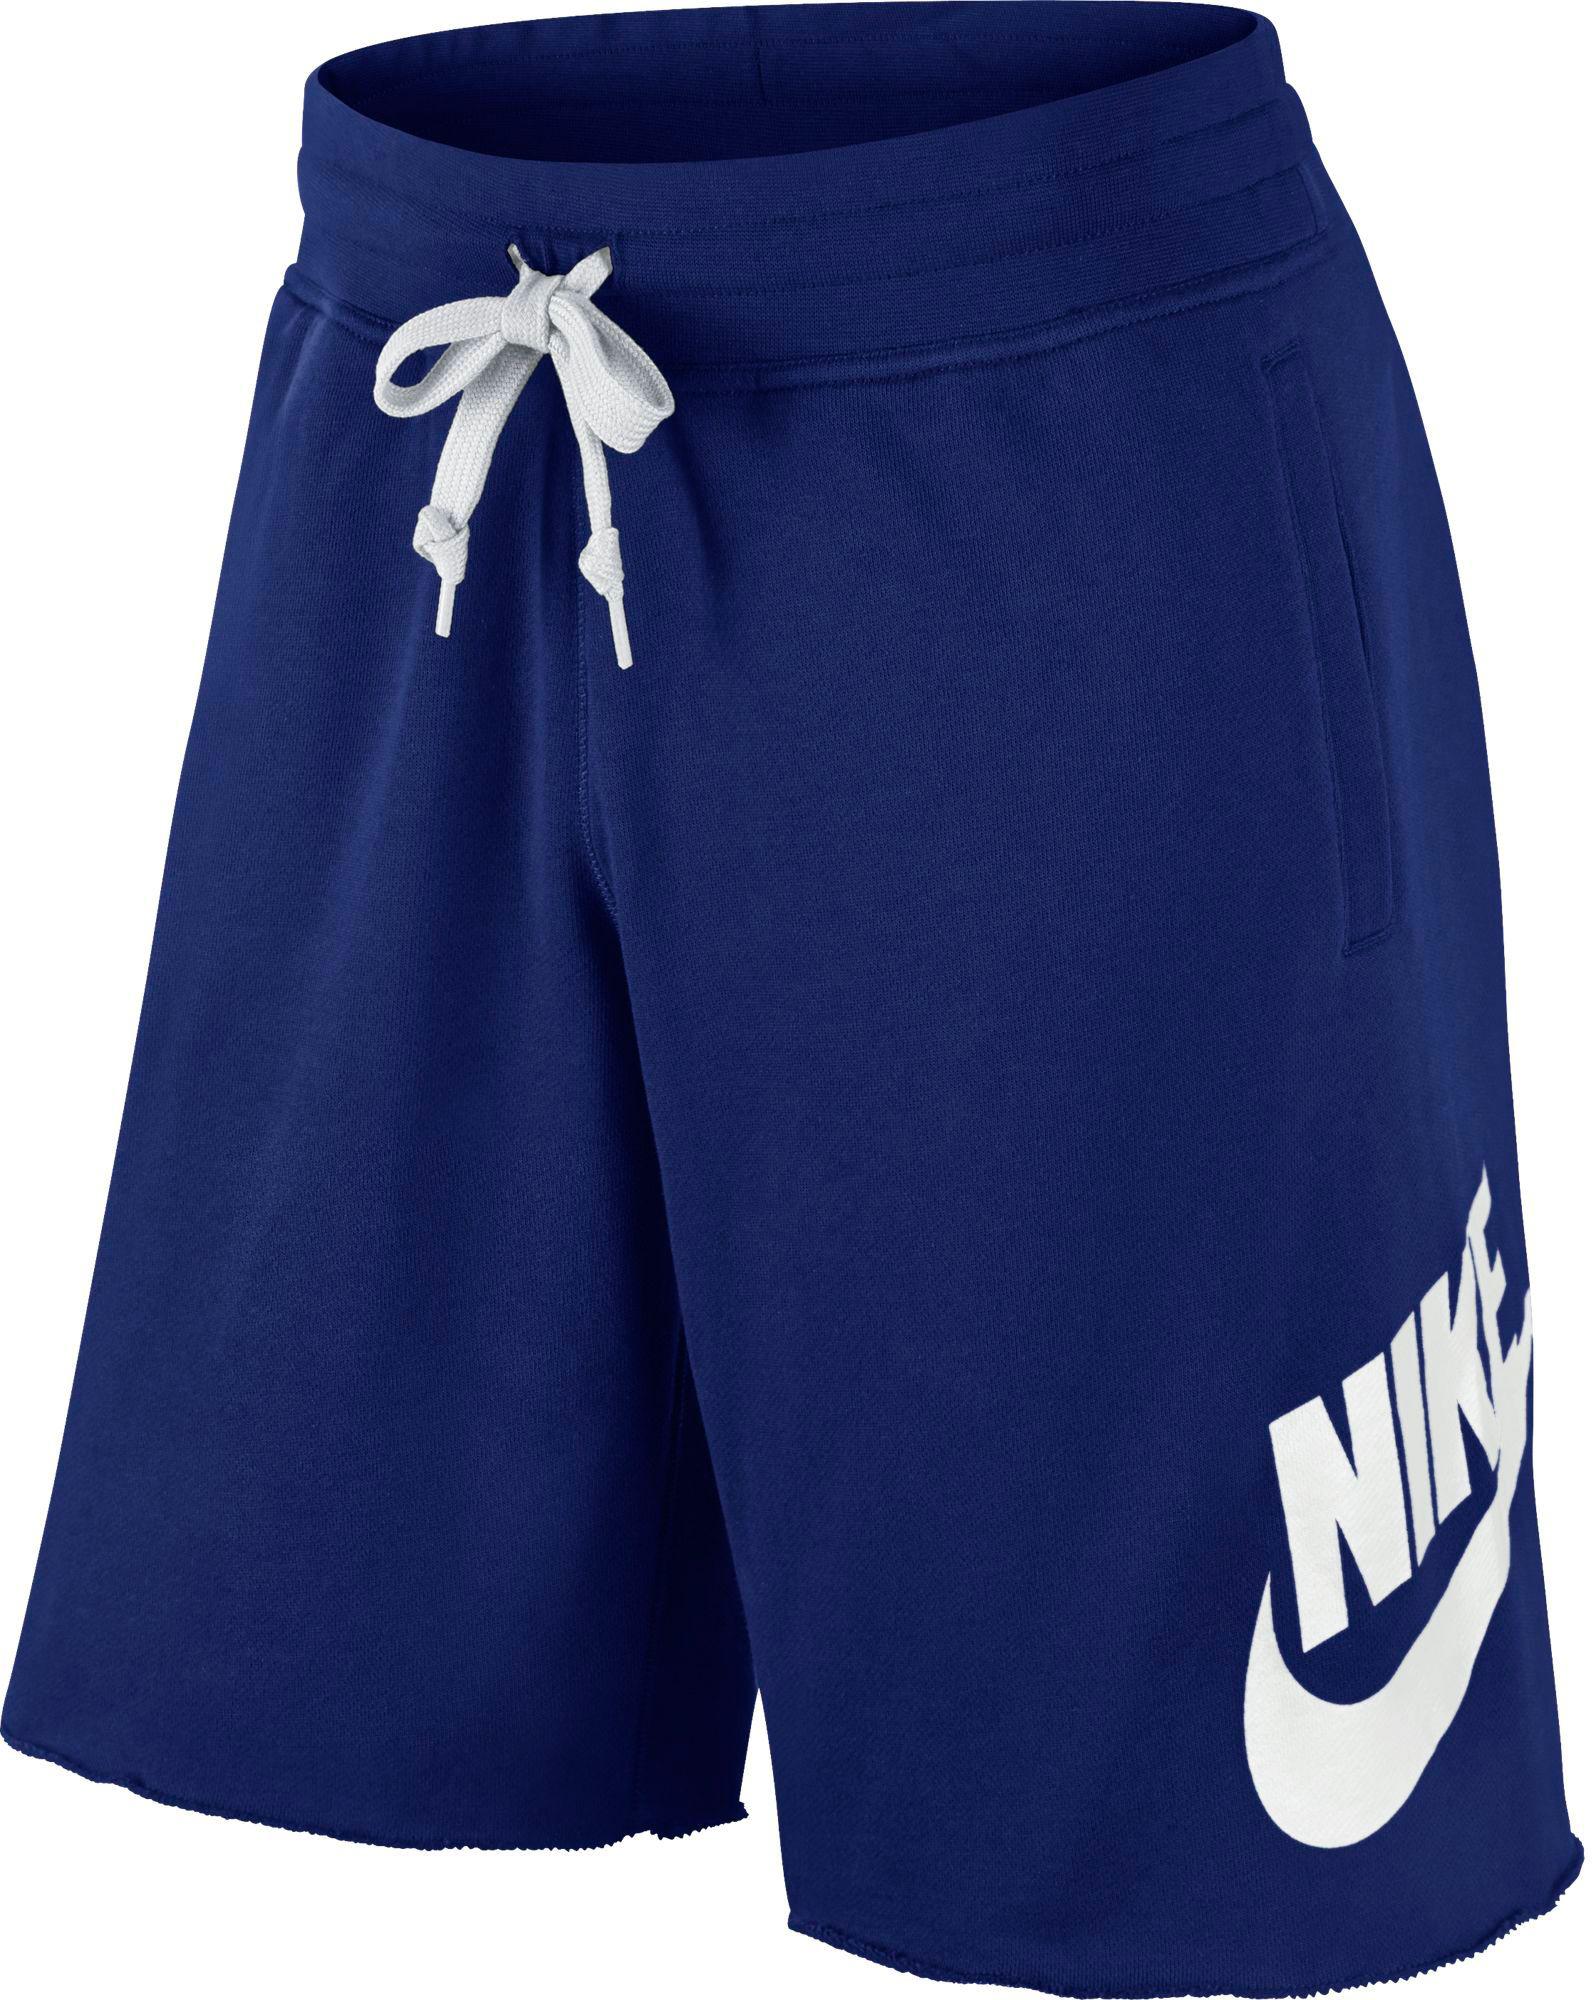 Nike Cotton Aw77 French Terry Alumni Shorts in Blue for Men - Lyst